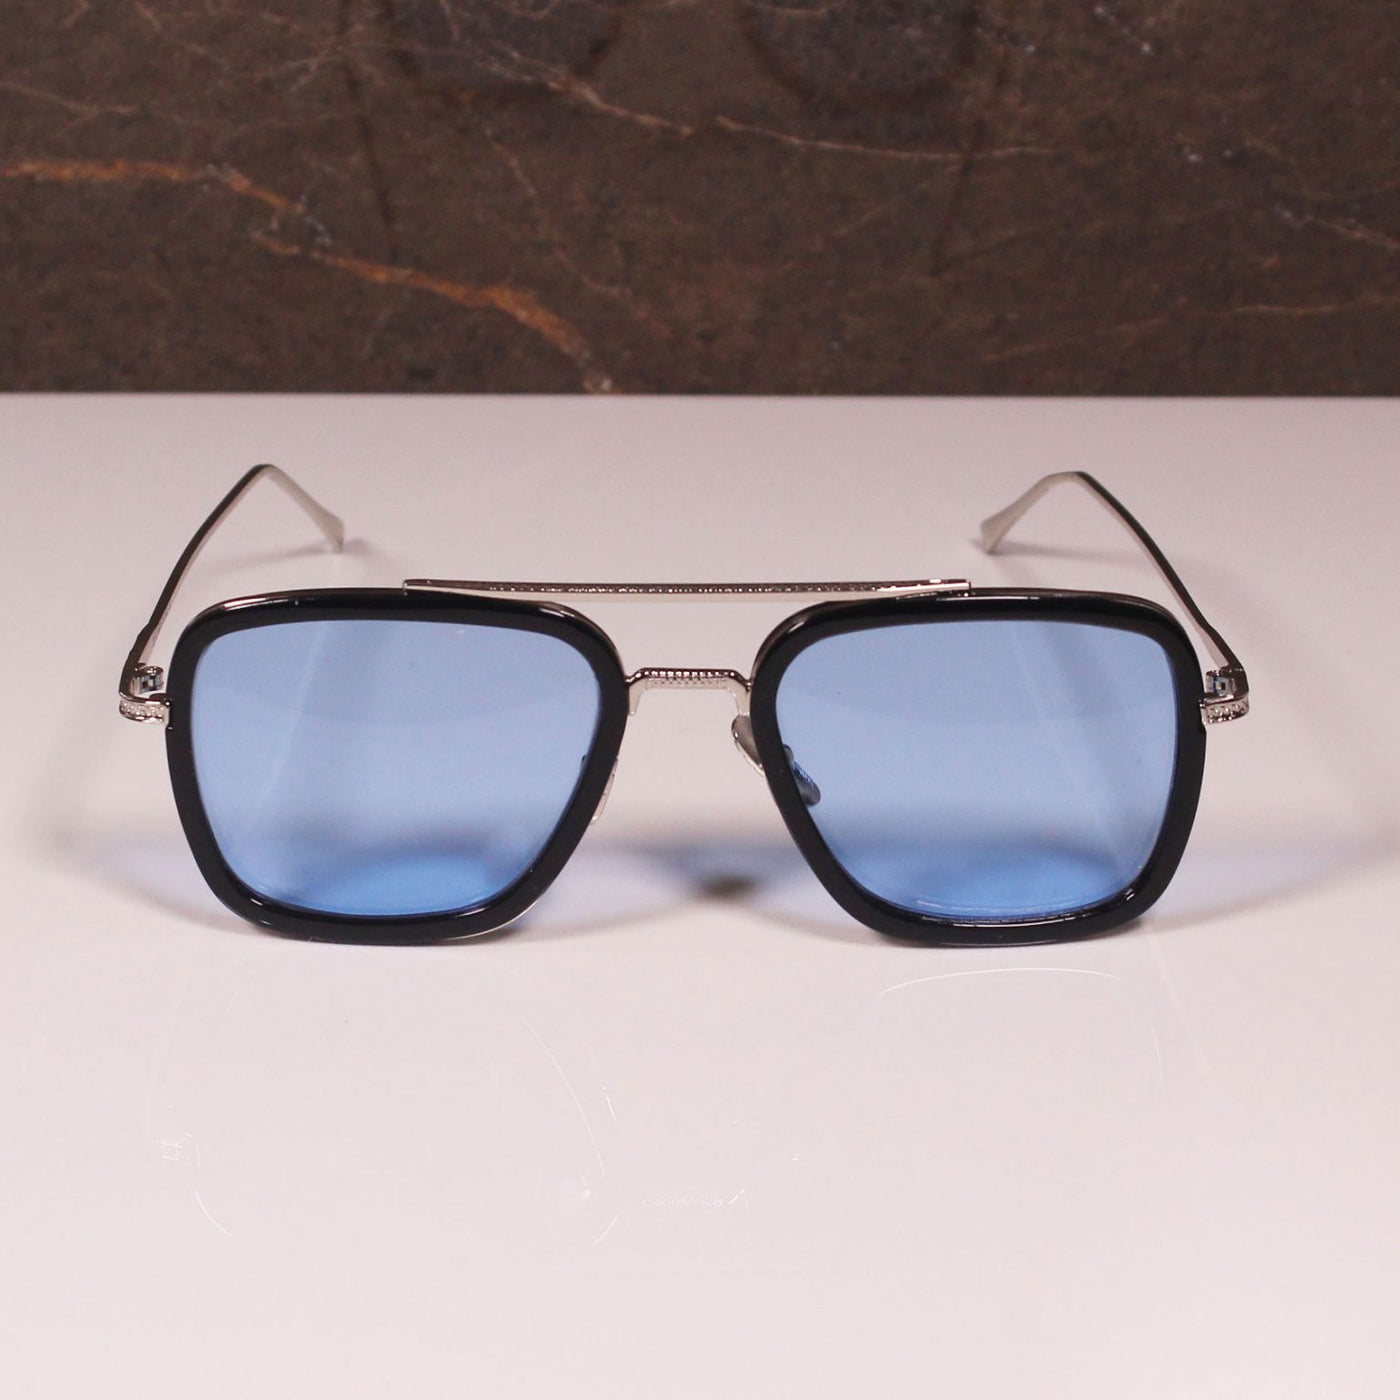 Tony Stark Blue Candy Sunglasses For Men And Women-Unique and Classy